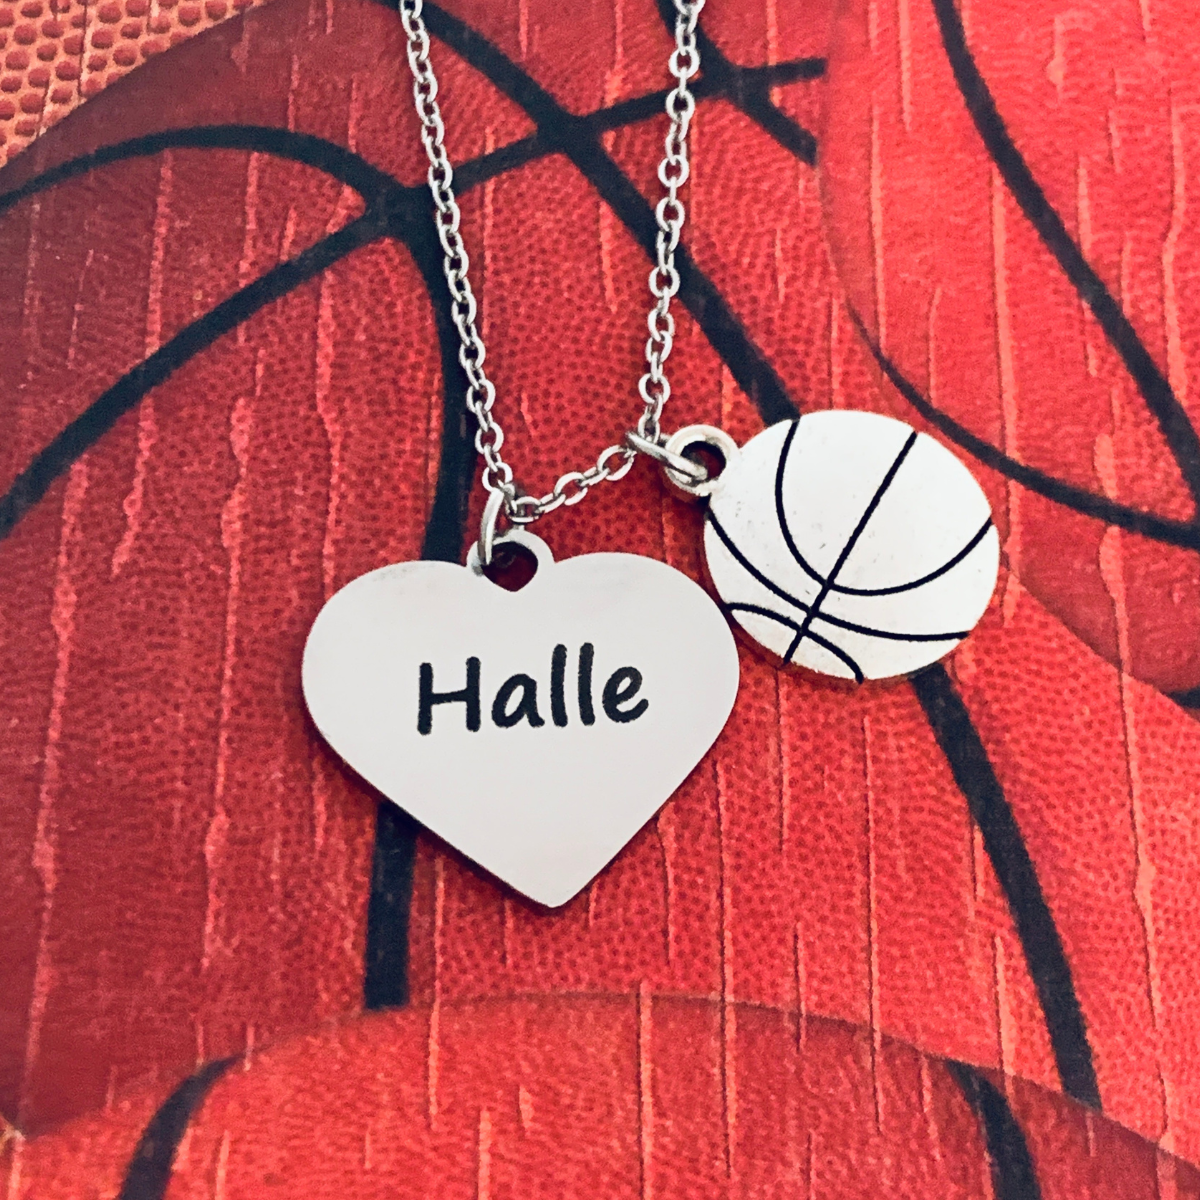 Engraved Basketball Heart Necklace